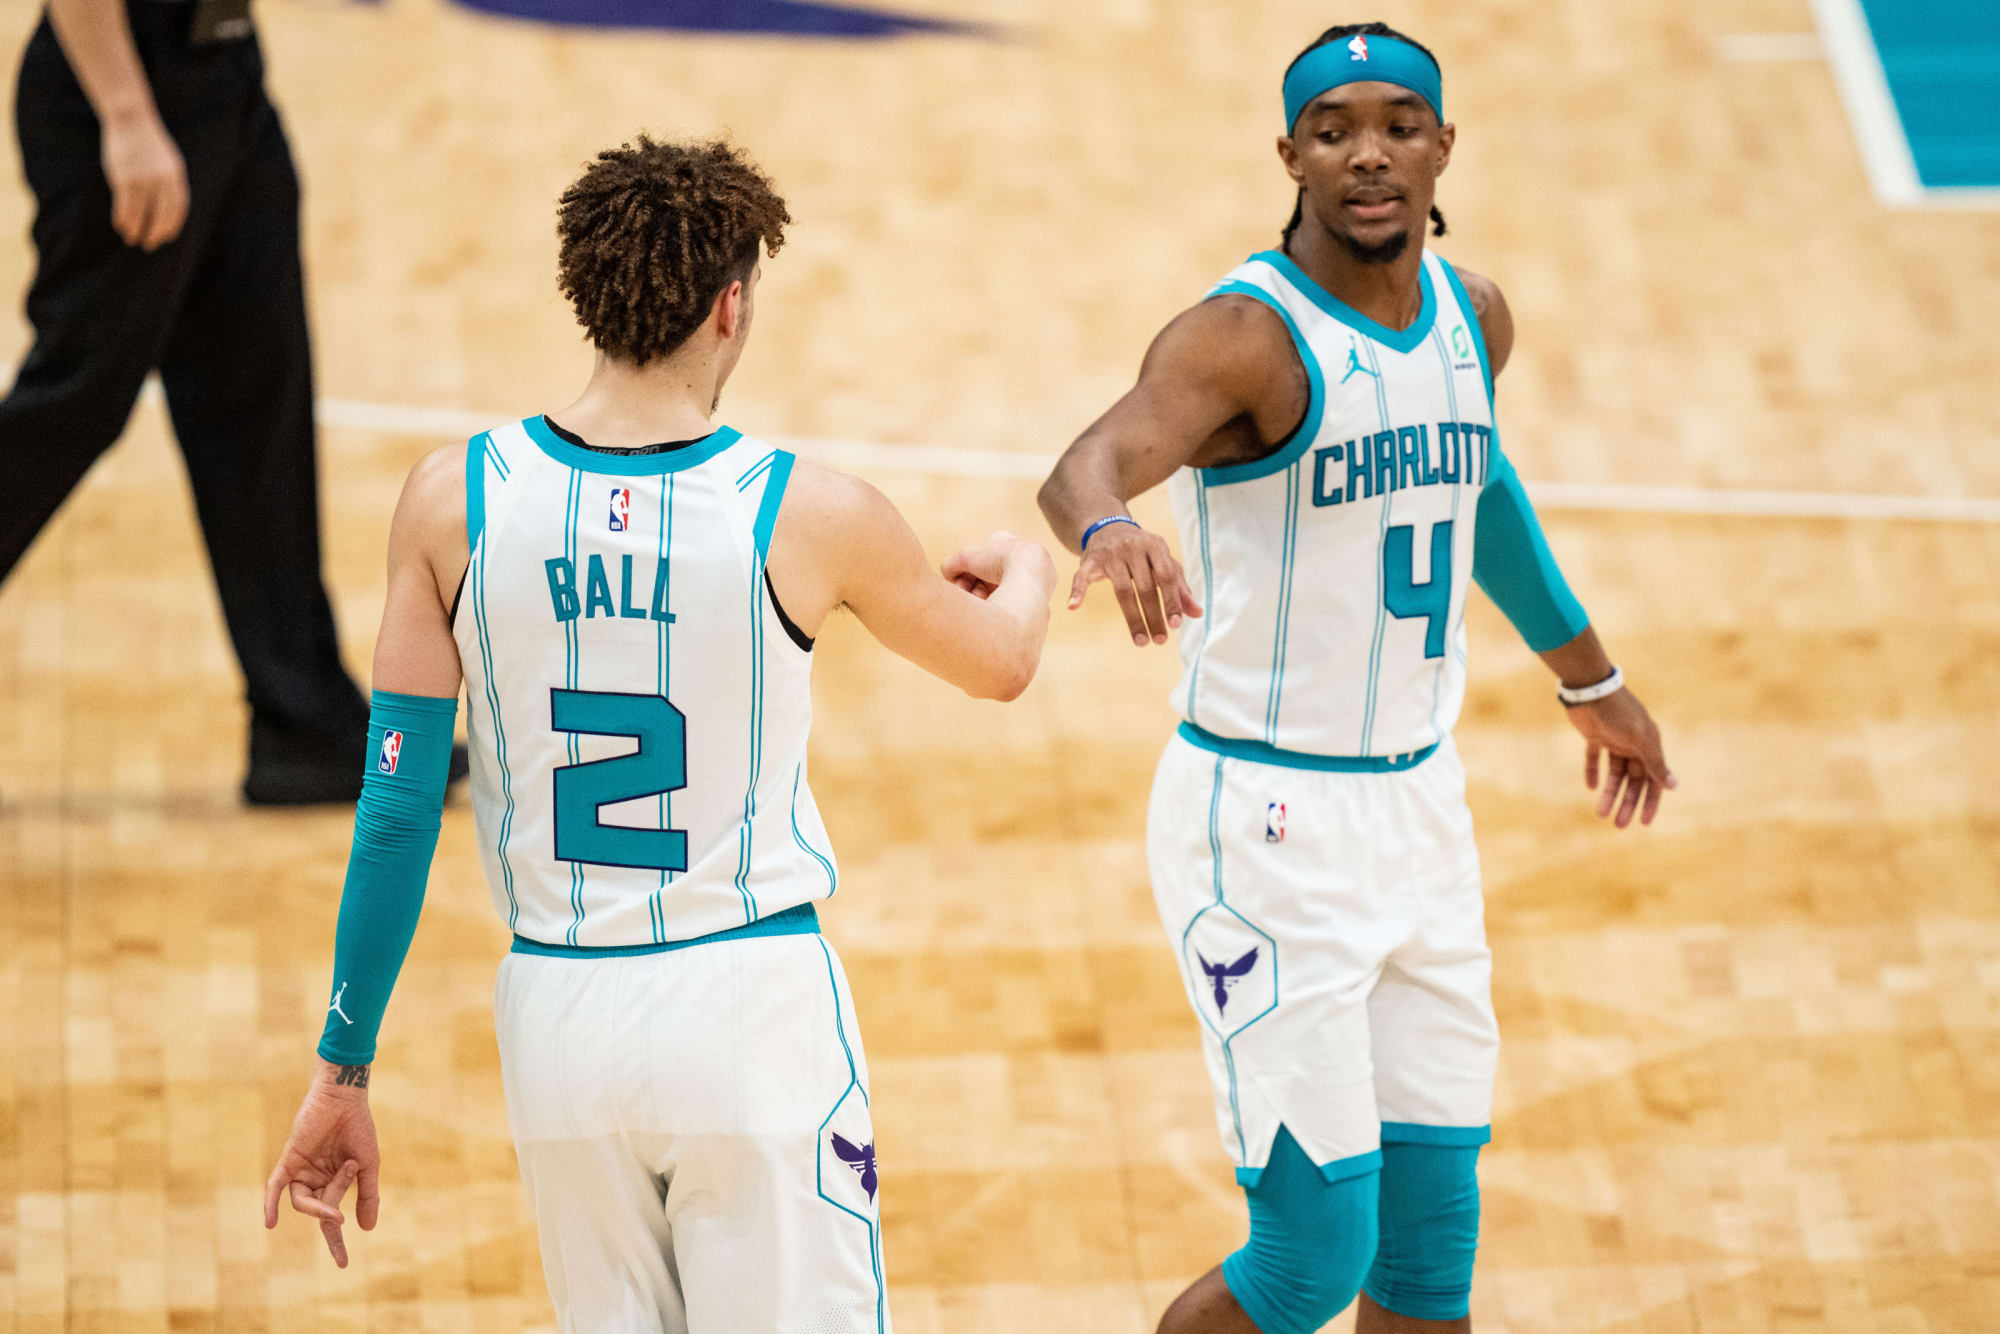 Charlotte Roster projections for the 202122 season